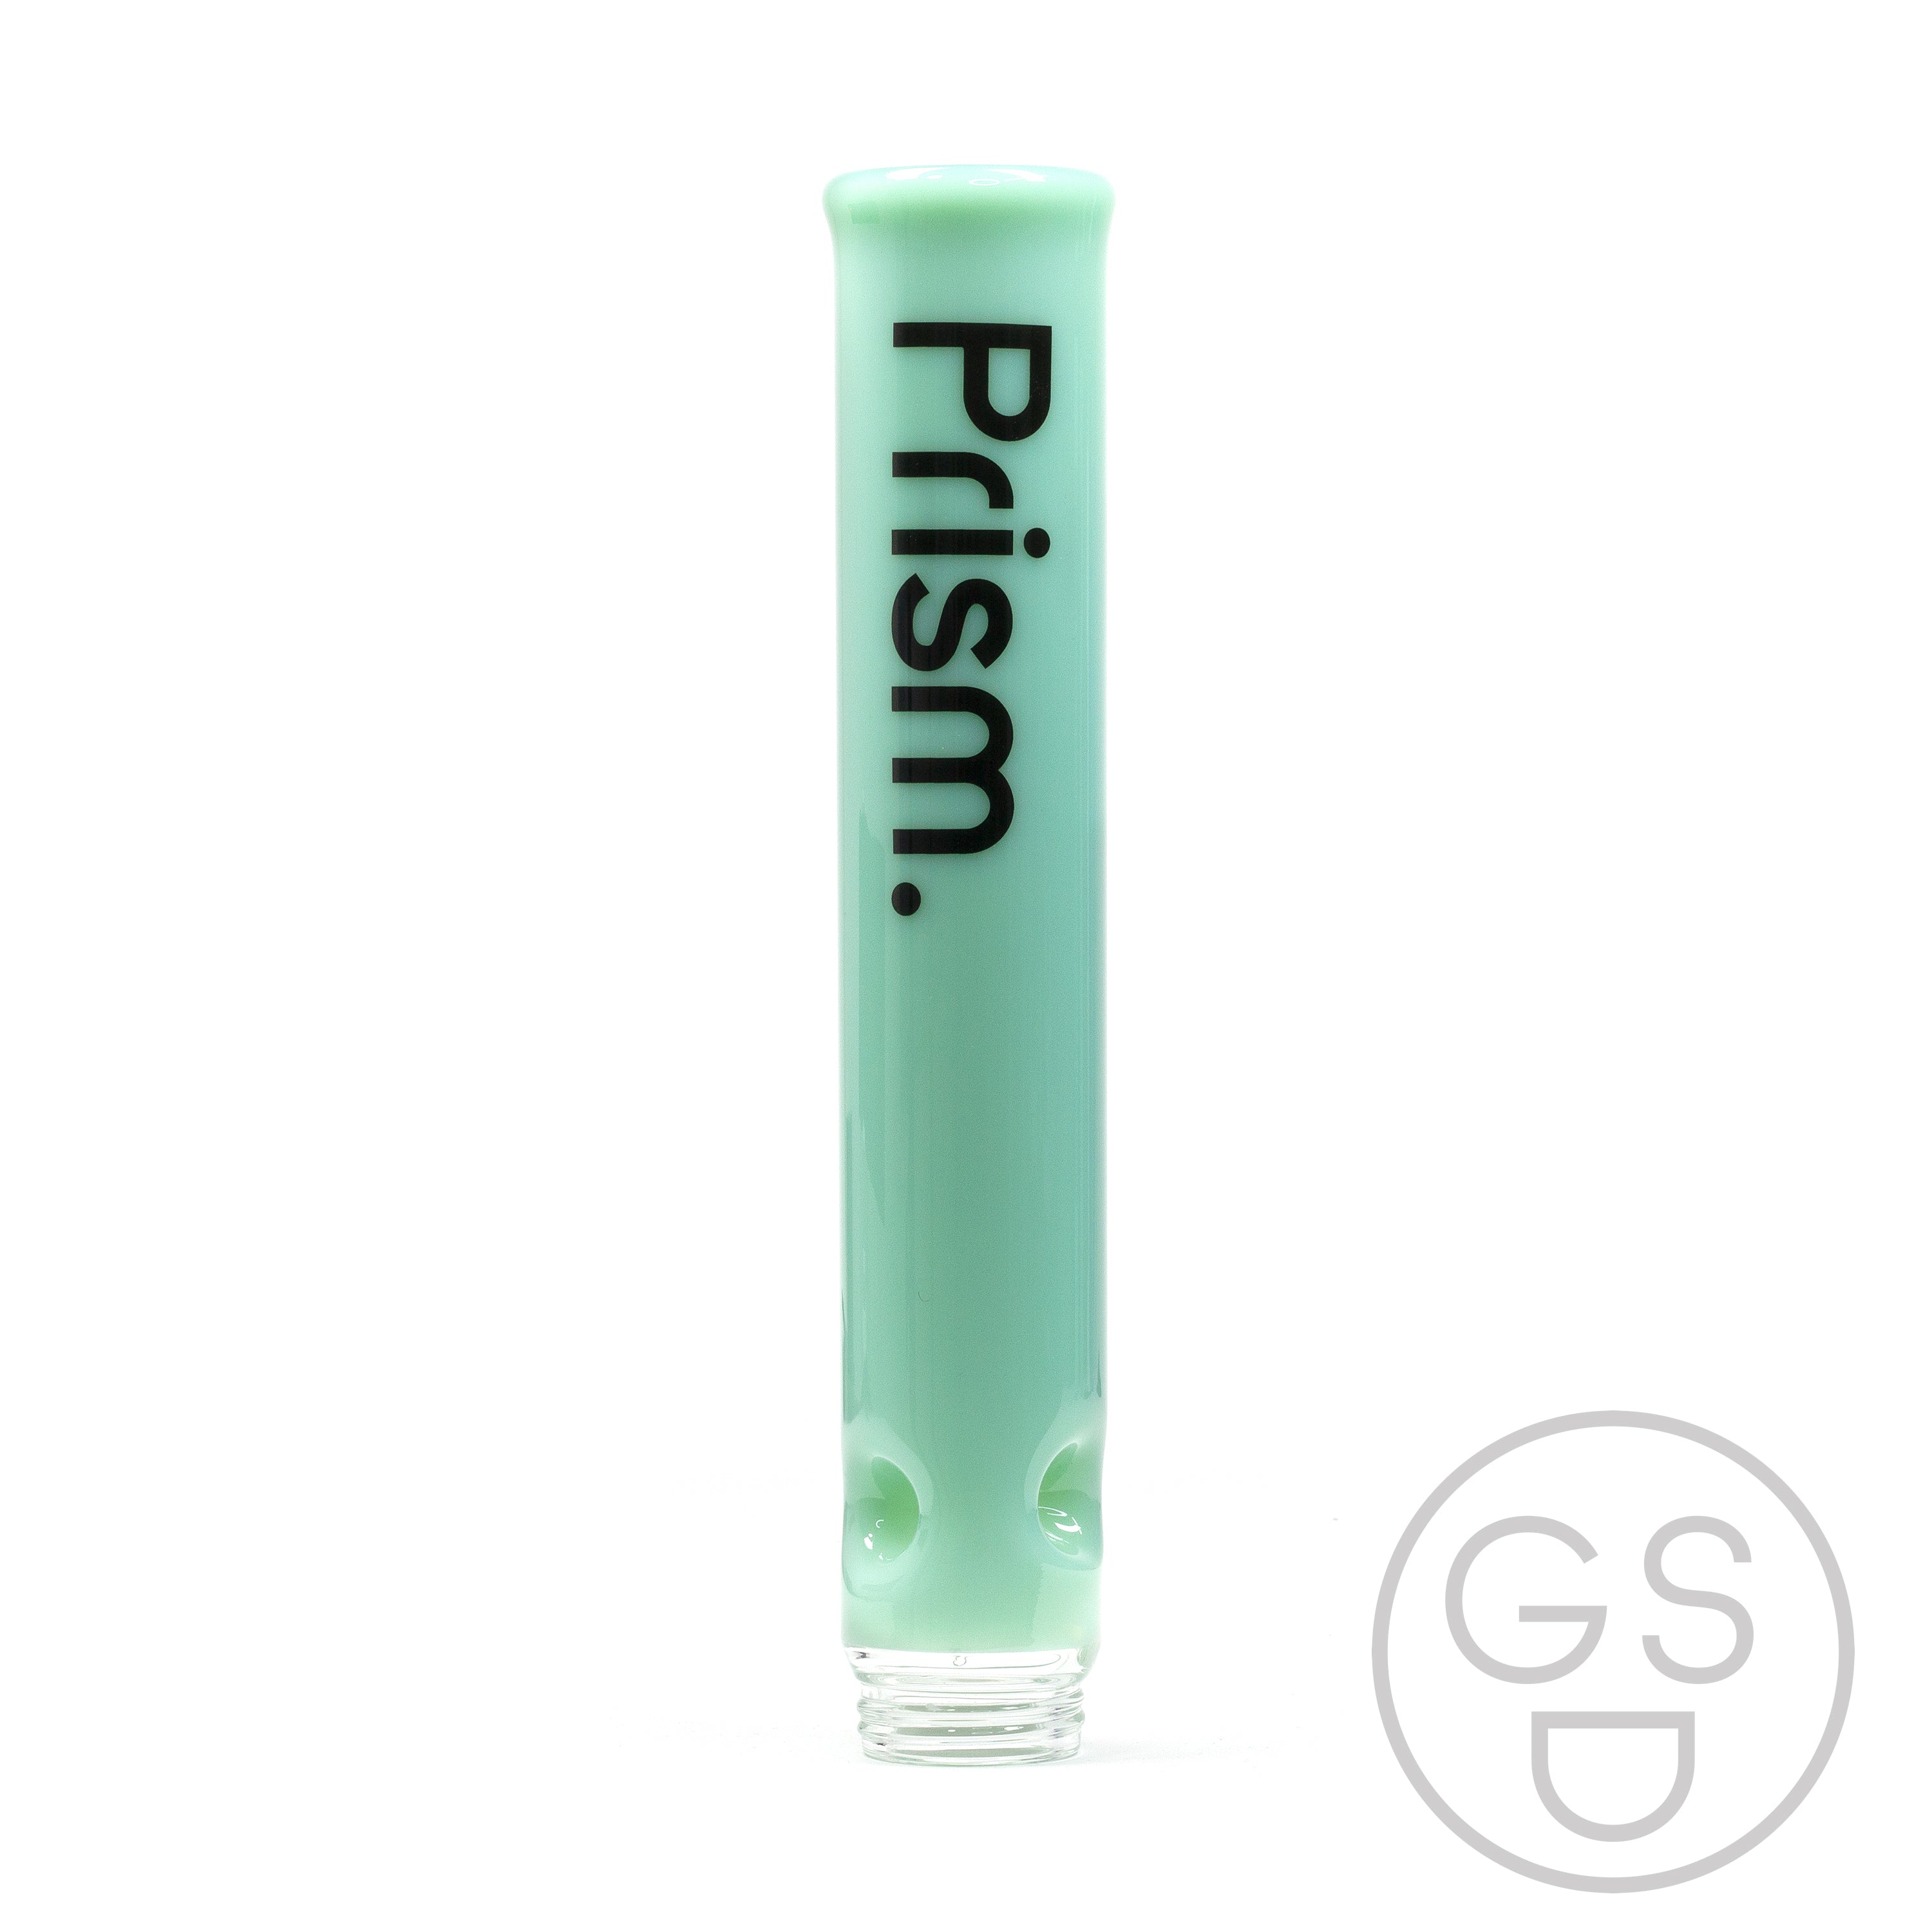 Prism Modular Waterpipe Tall Mouthpiece - Prism / Mint